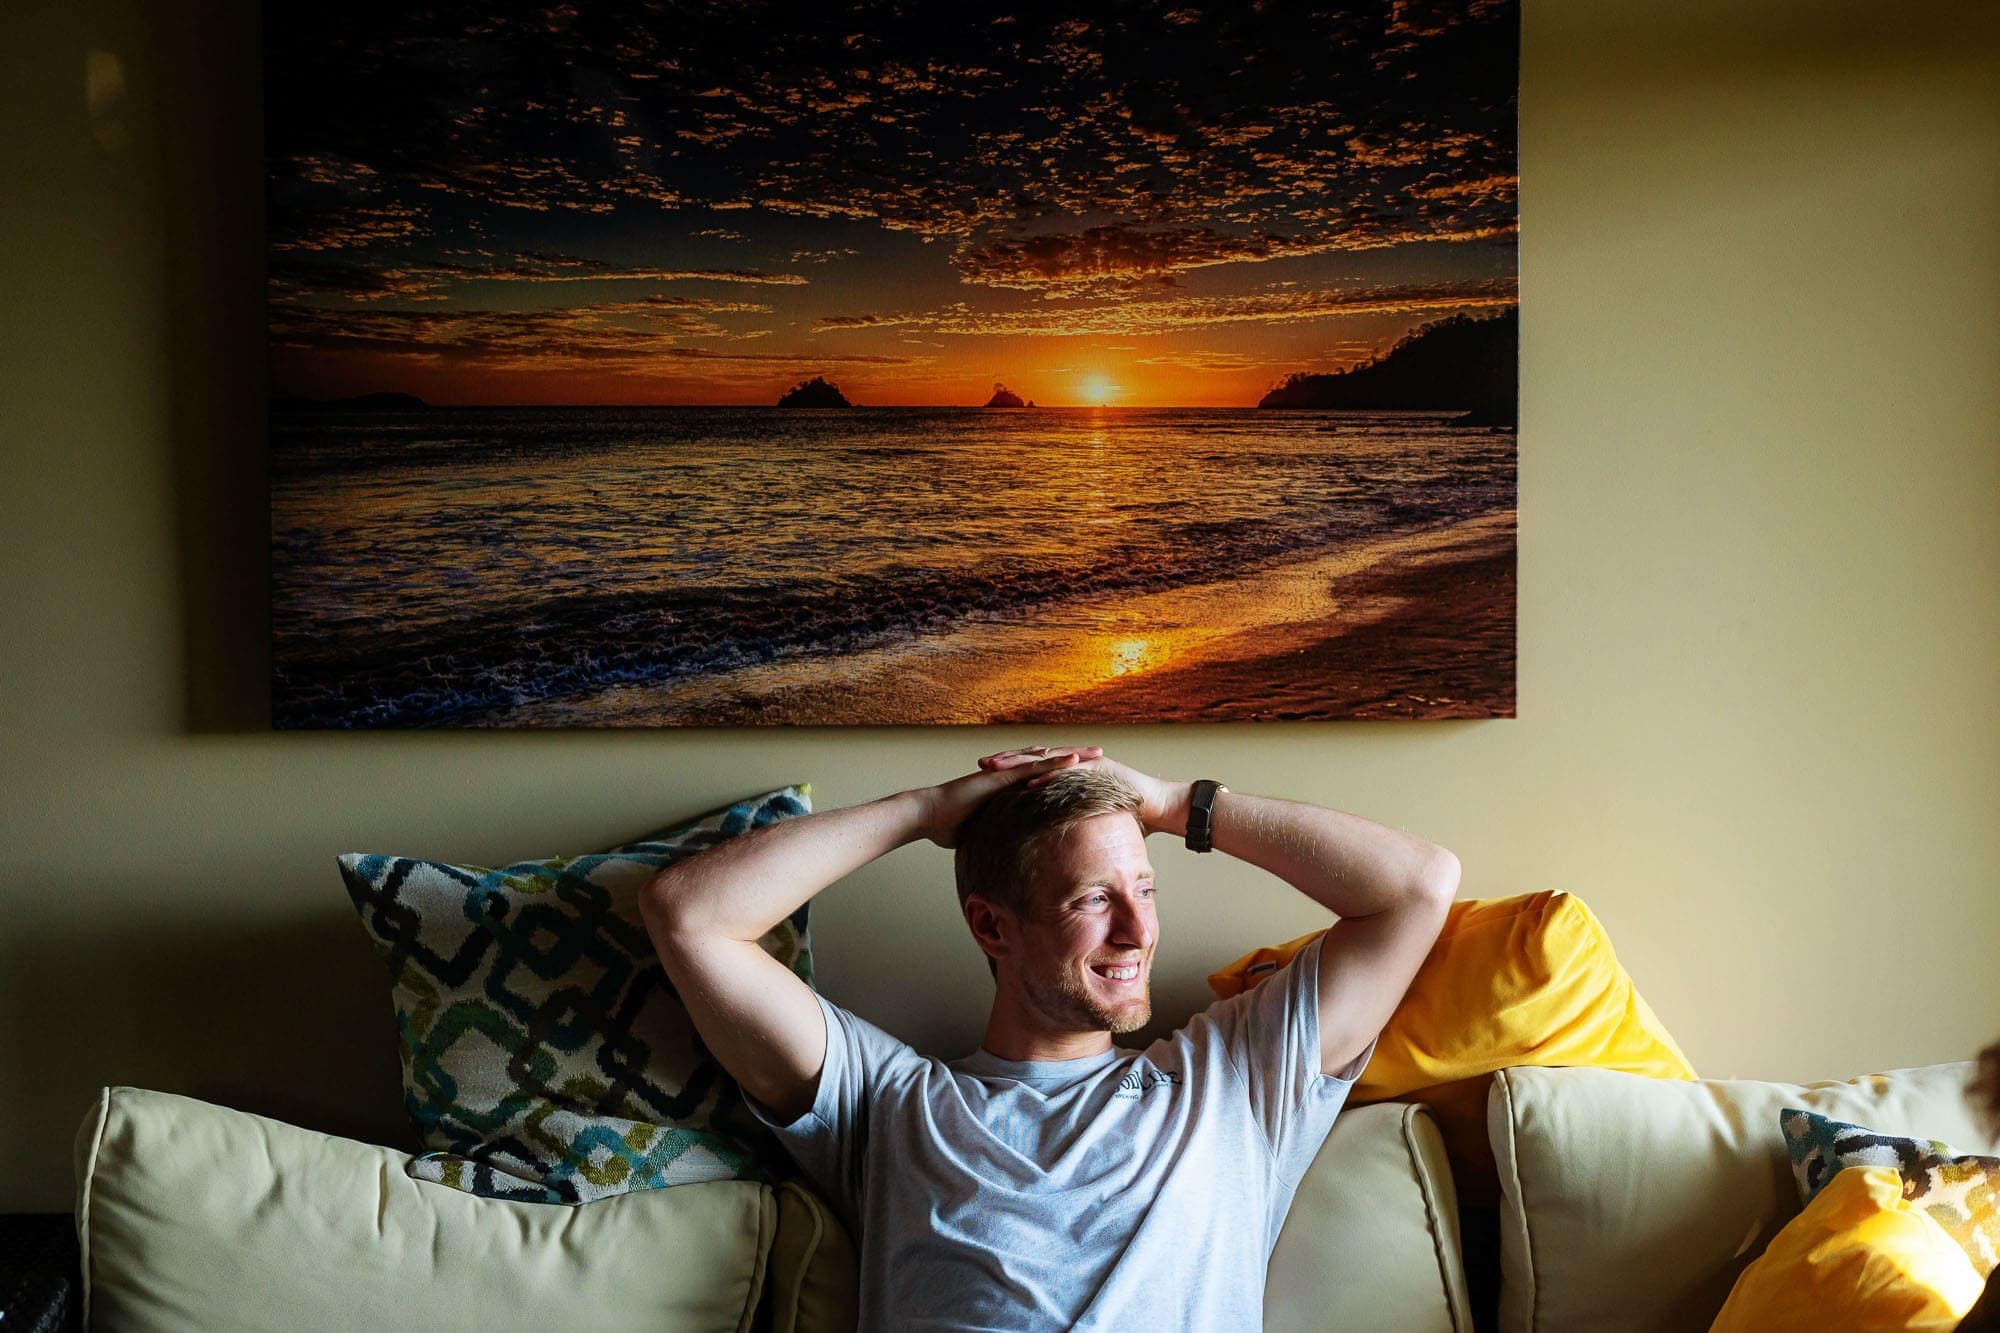 The groom seated under a stunning painting of a sunset